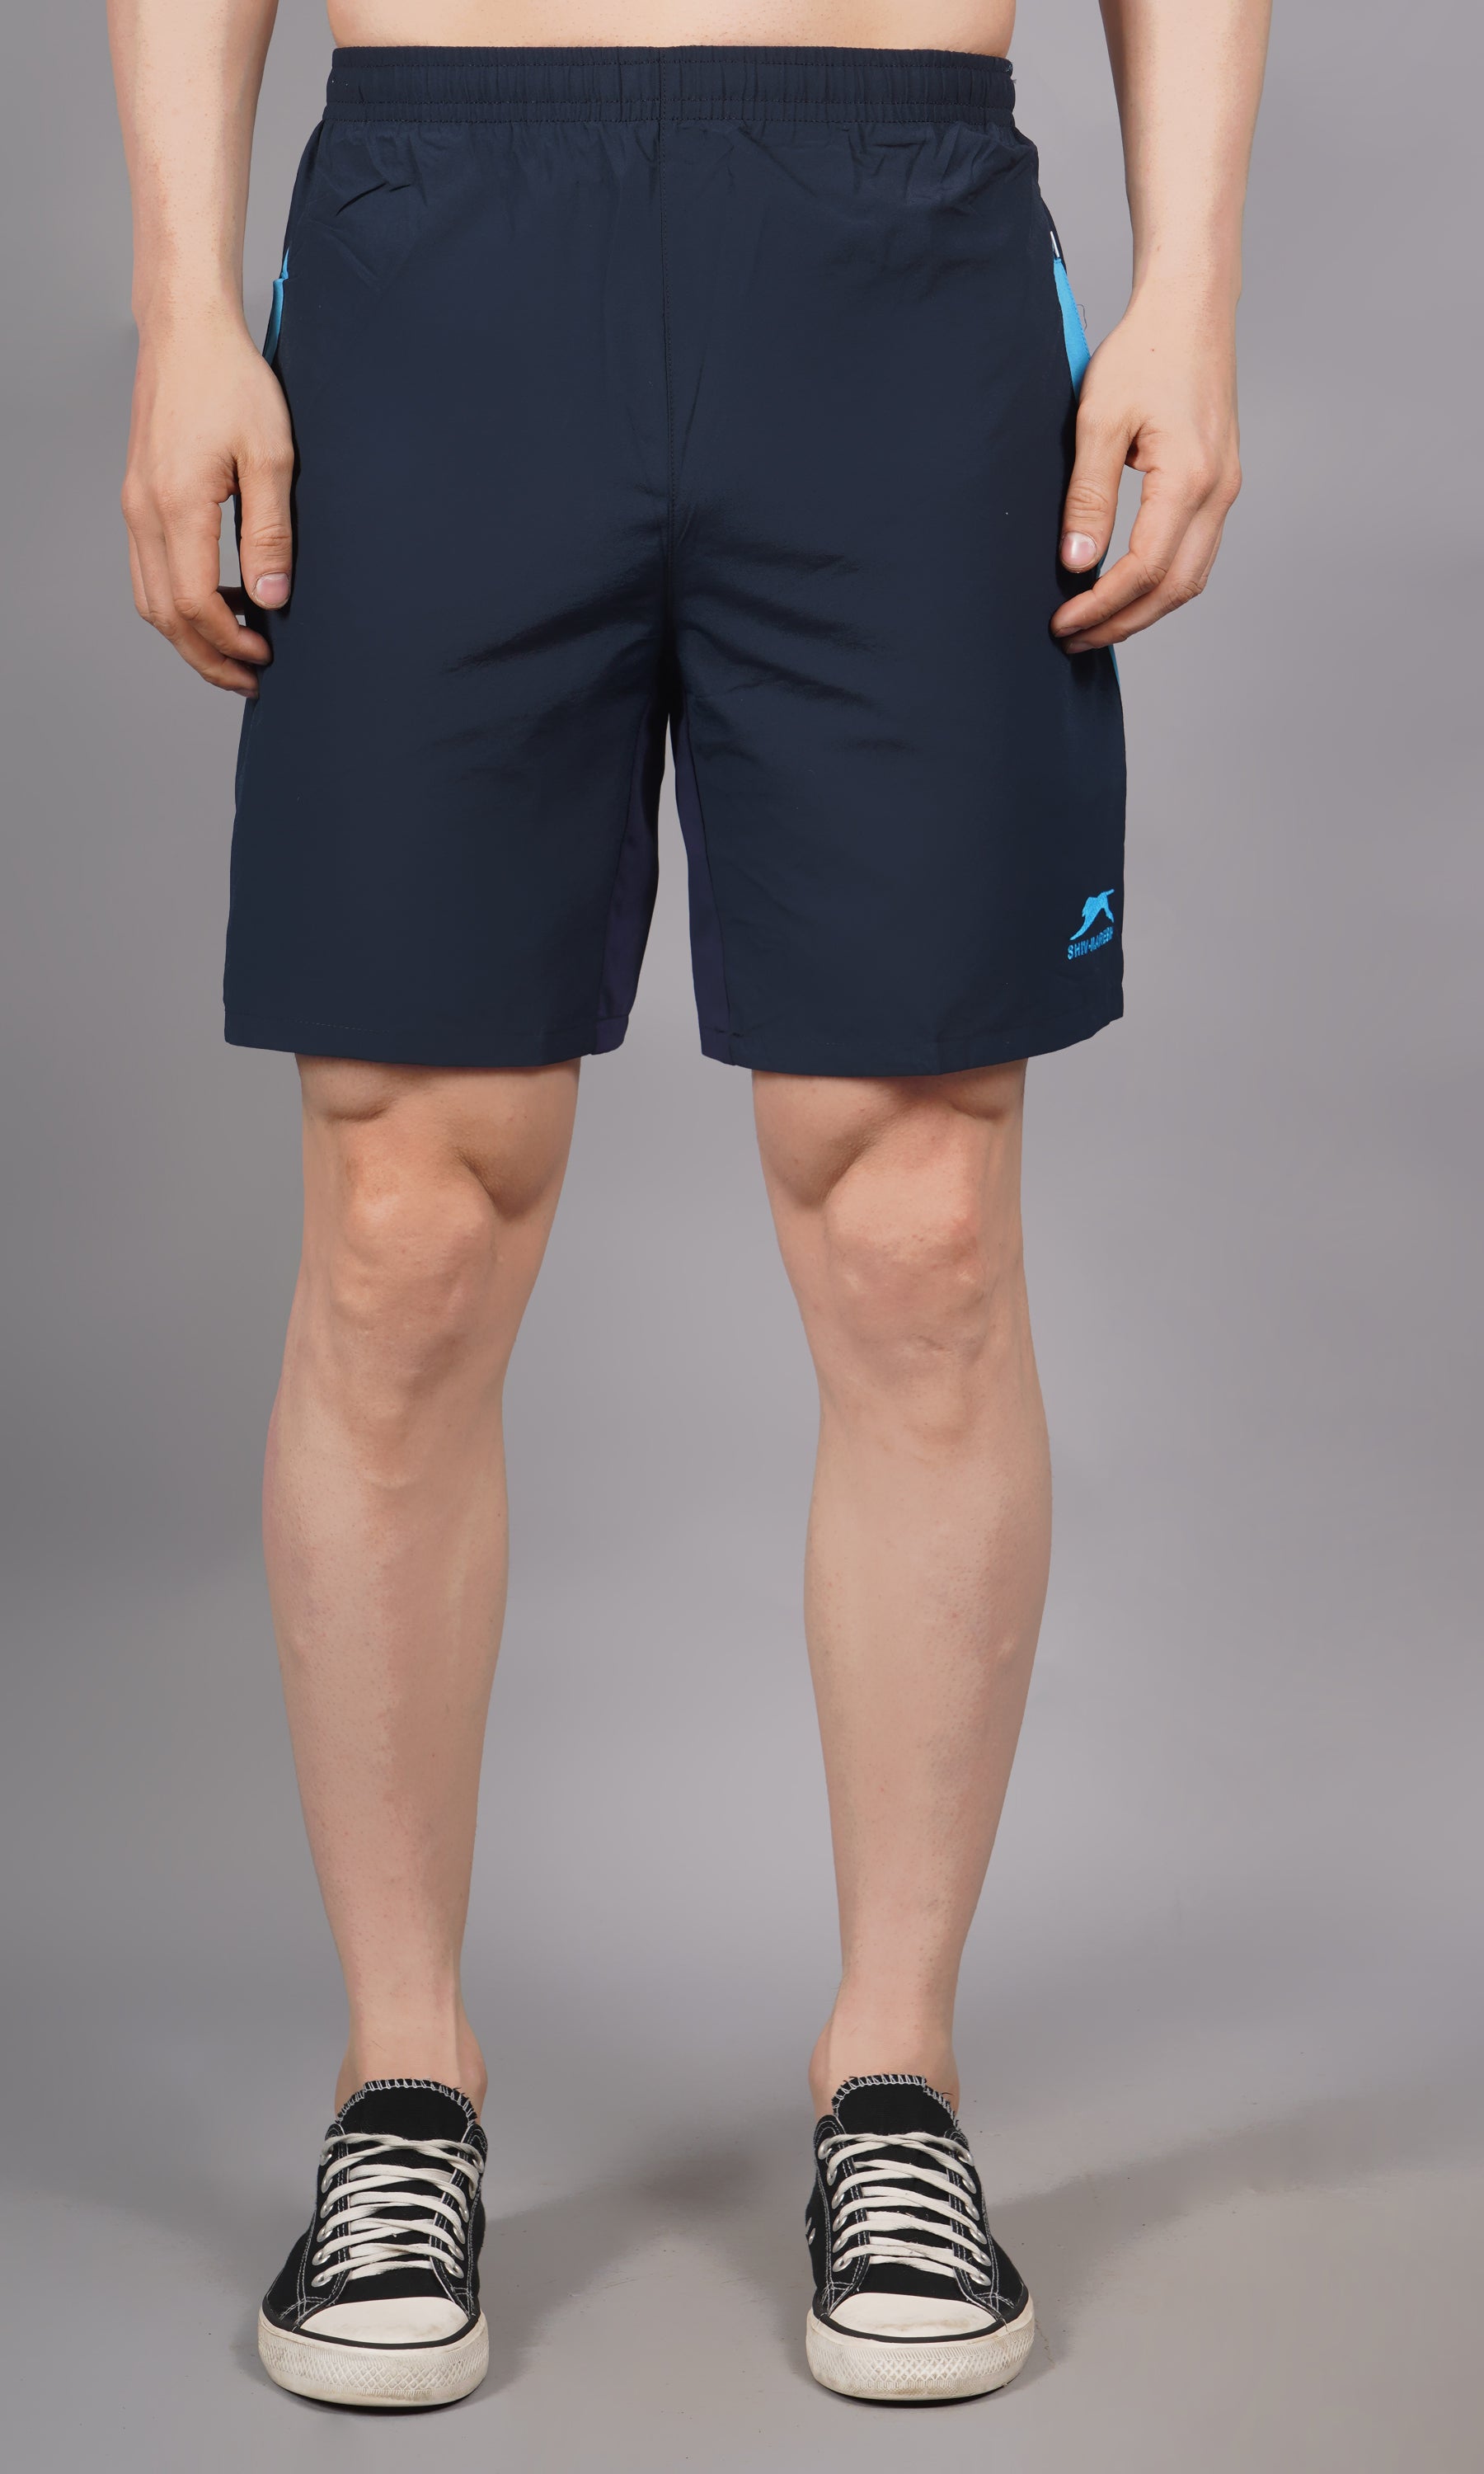 Running Shorts Men 2 in 1 Double-Deck Quick Dry GYM Sport Shorts Pants  Workout | eBay